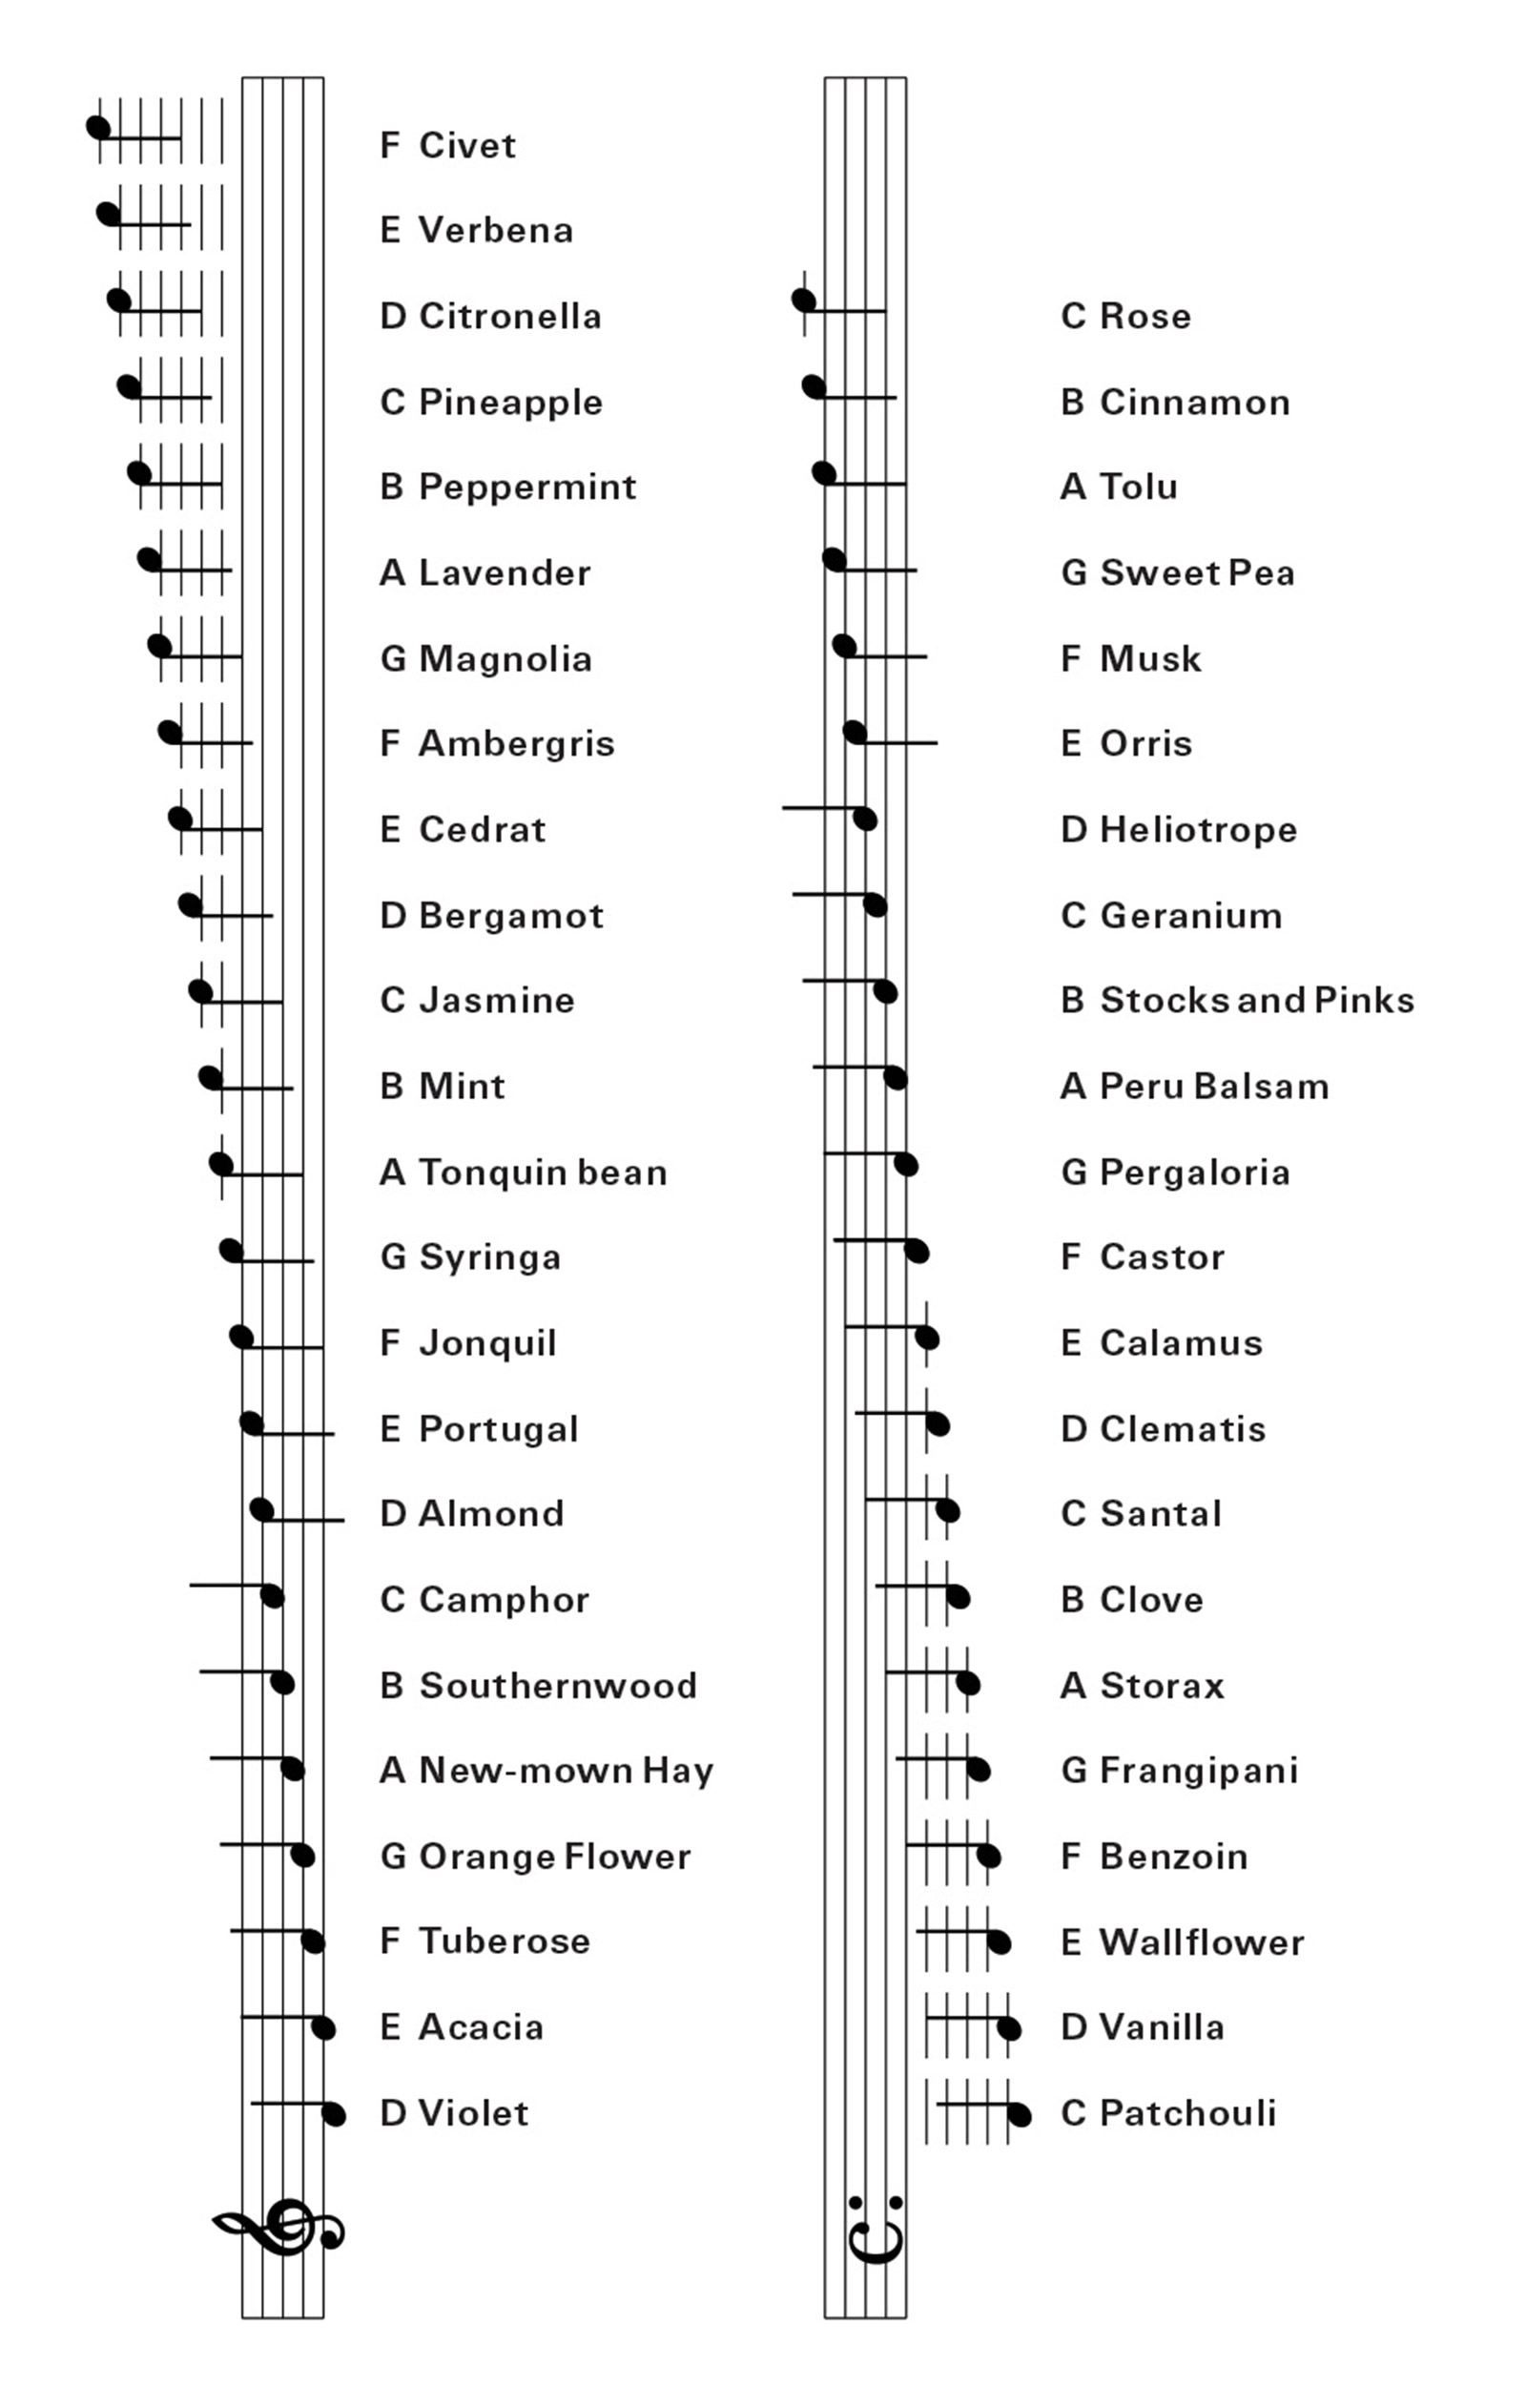 A 1857 music-inspired taxonomy of scent by chemist and perfumer George William Septimus Piesse in his book The Art of Perfumery.